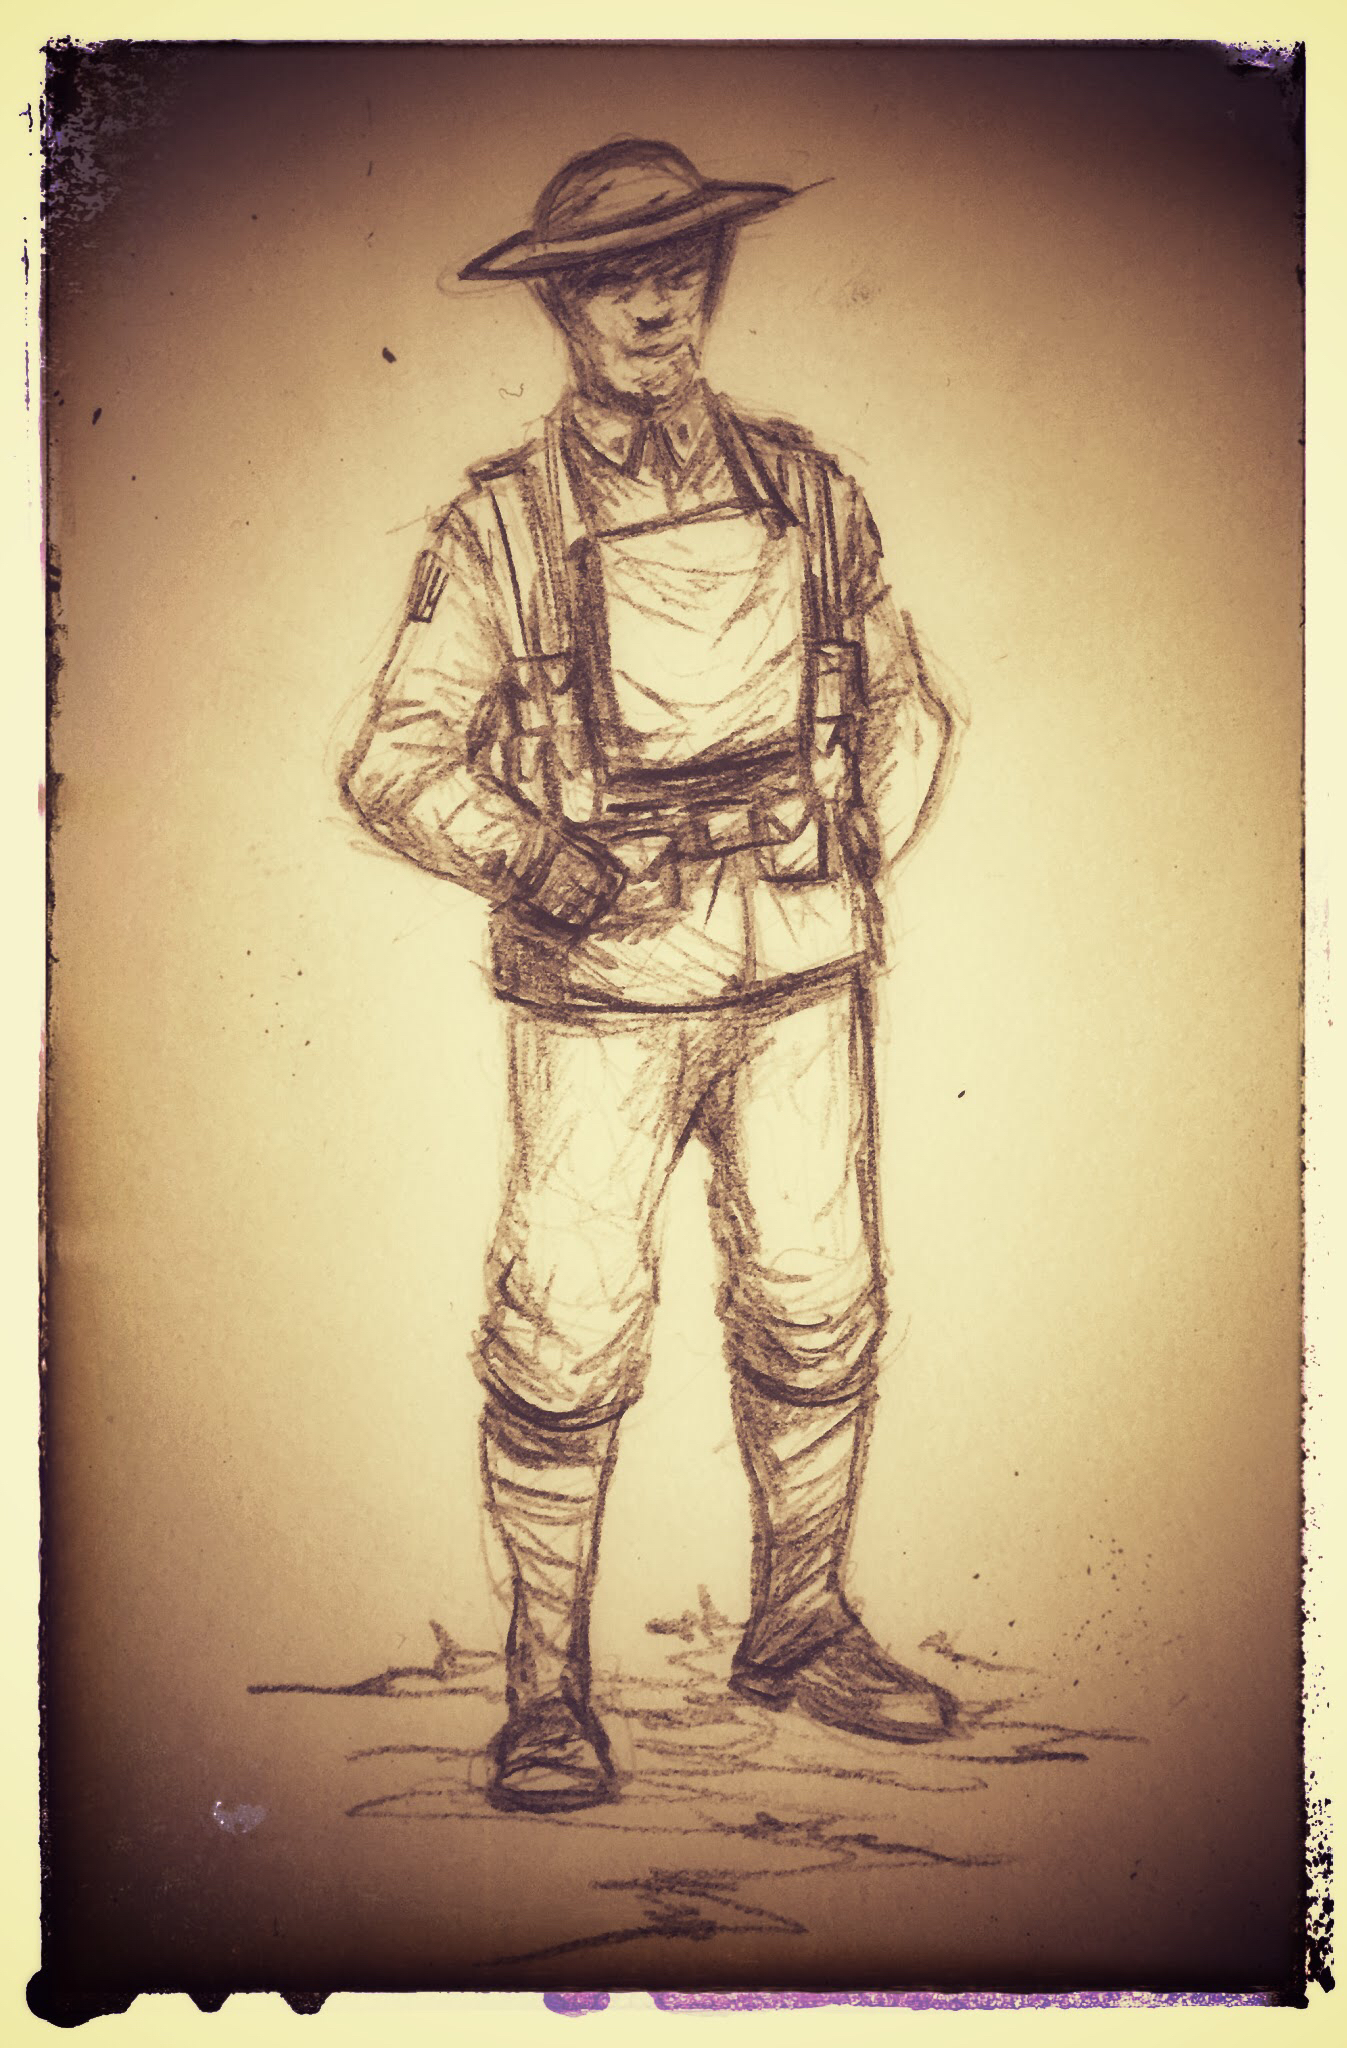 Simple Soldier Sketch Drawing with Realistic